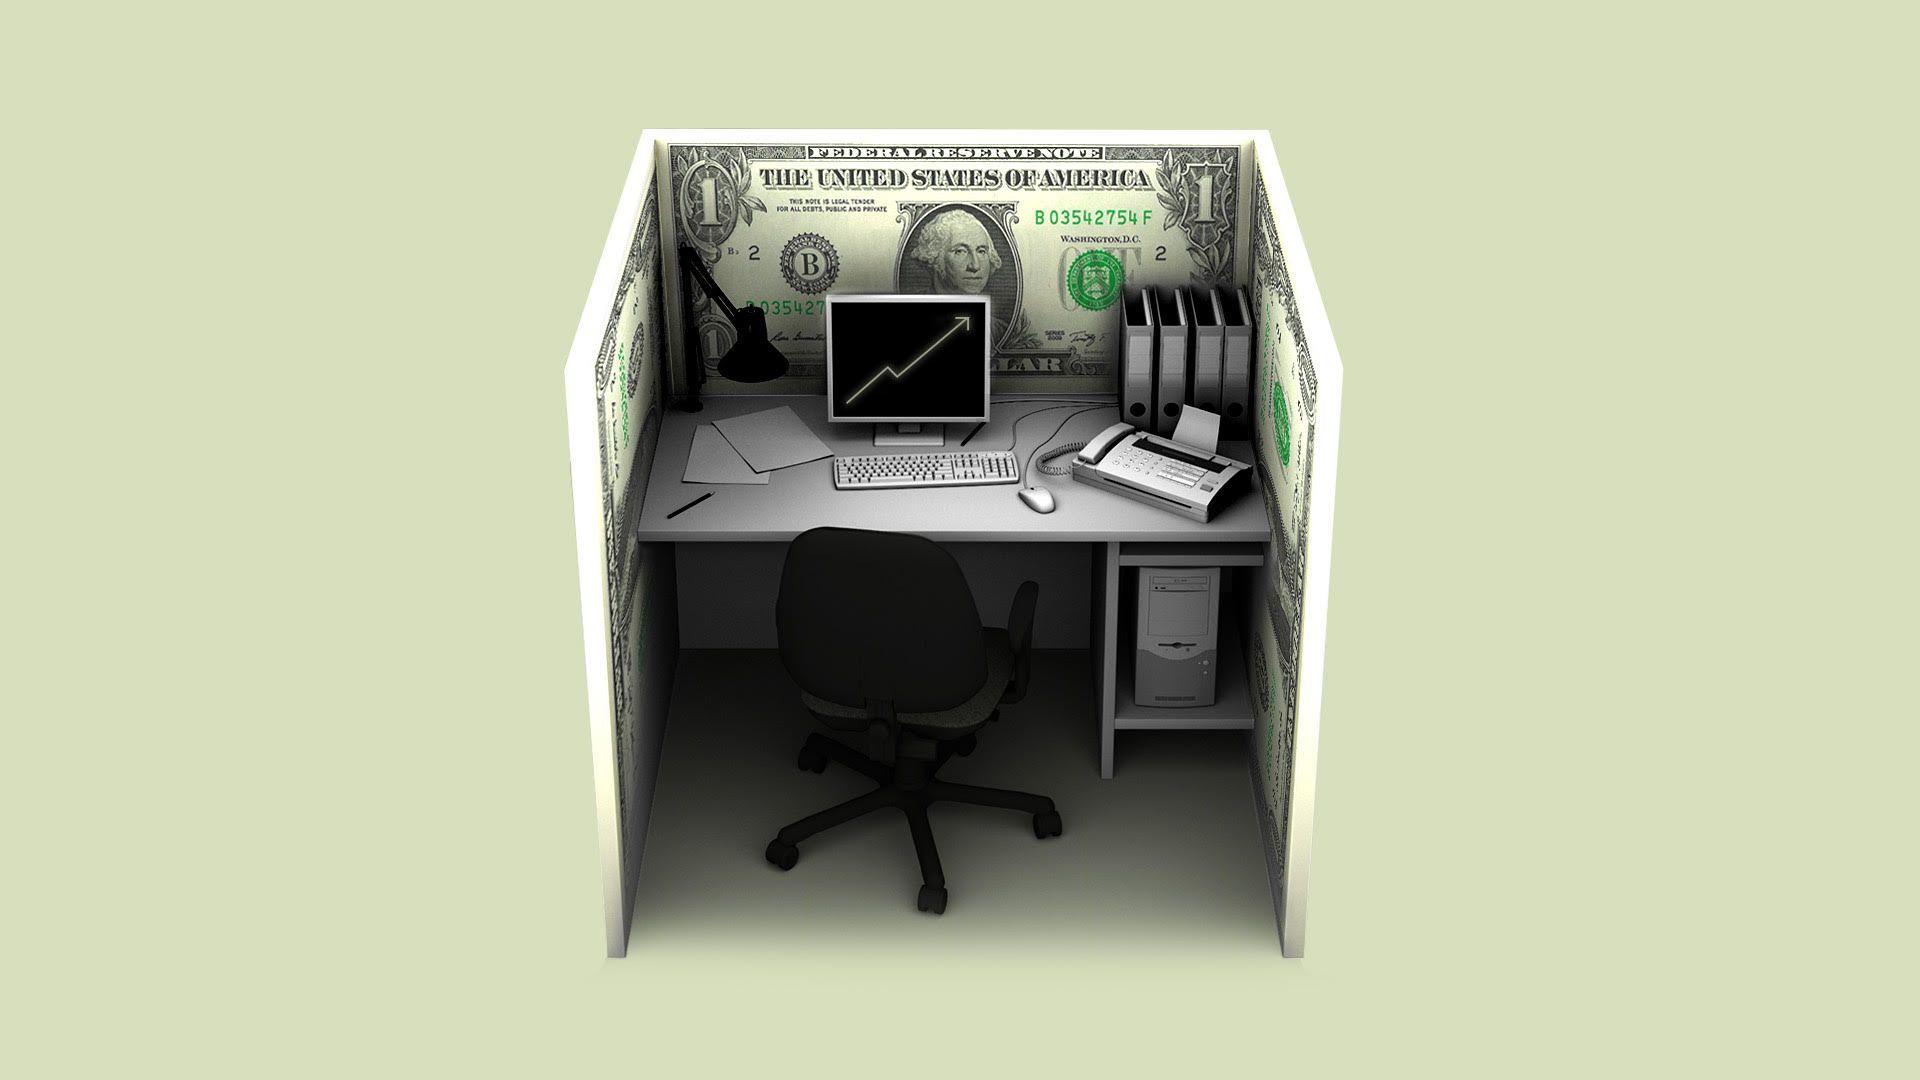 Illustration of  a cubicle made of money.